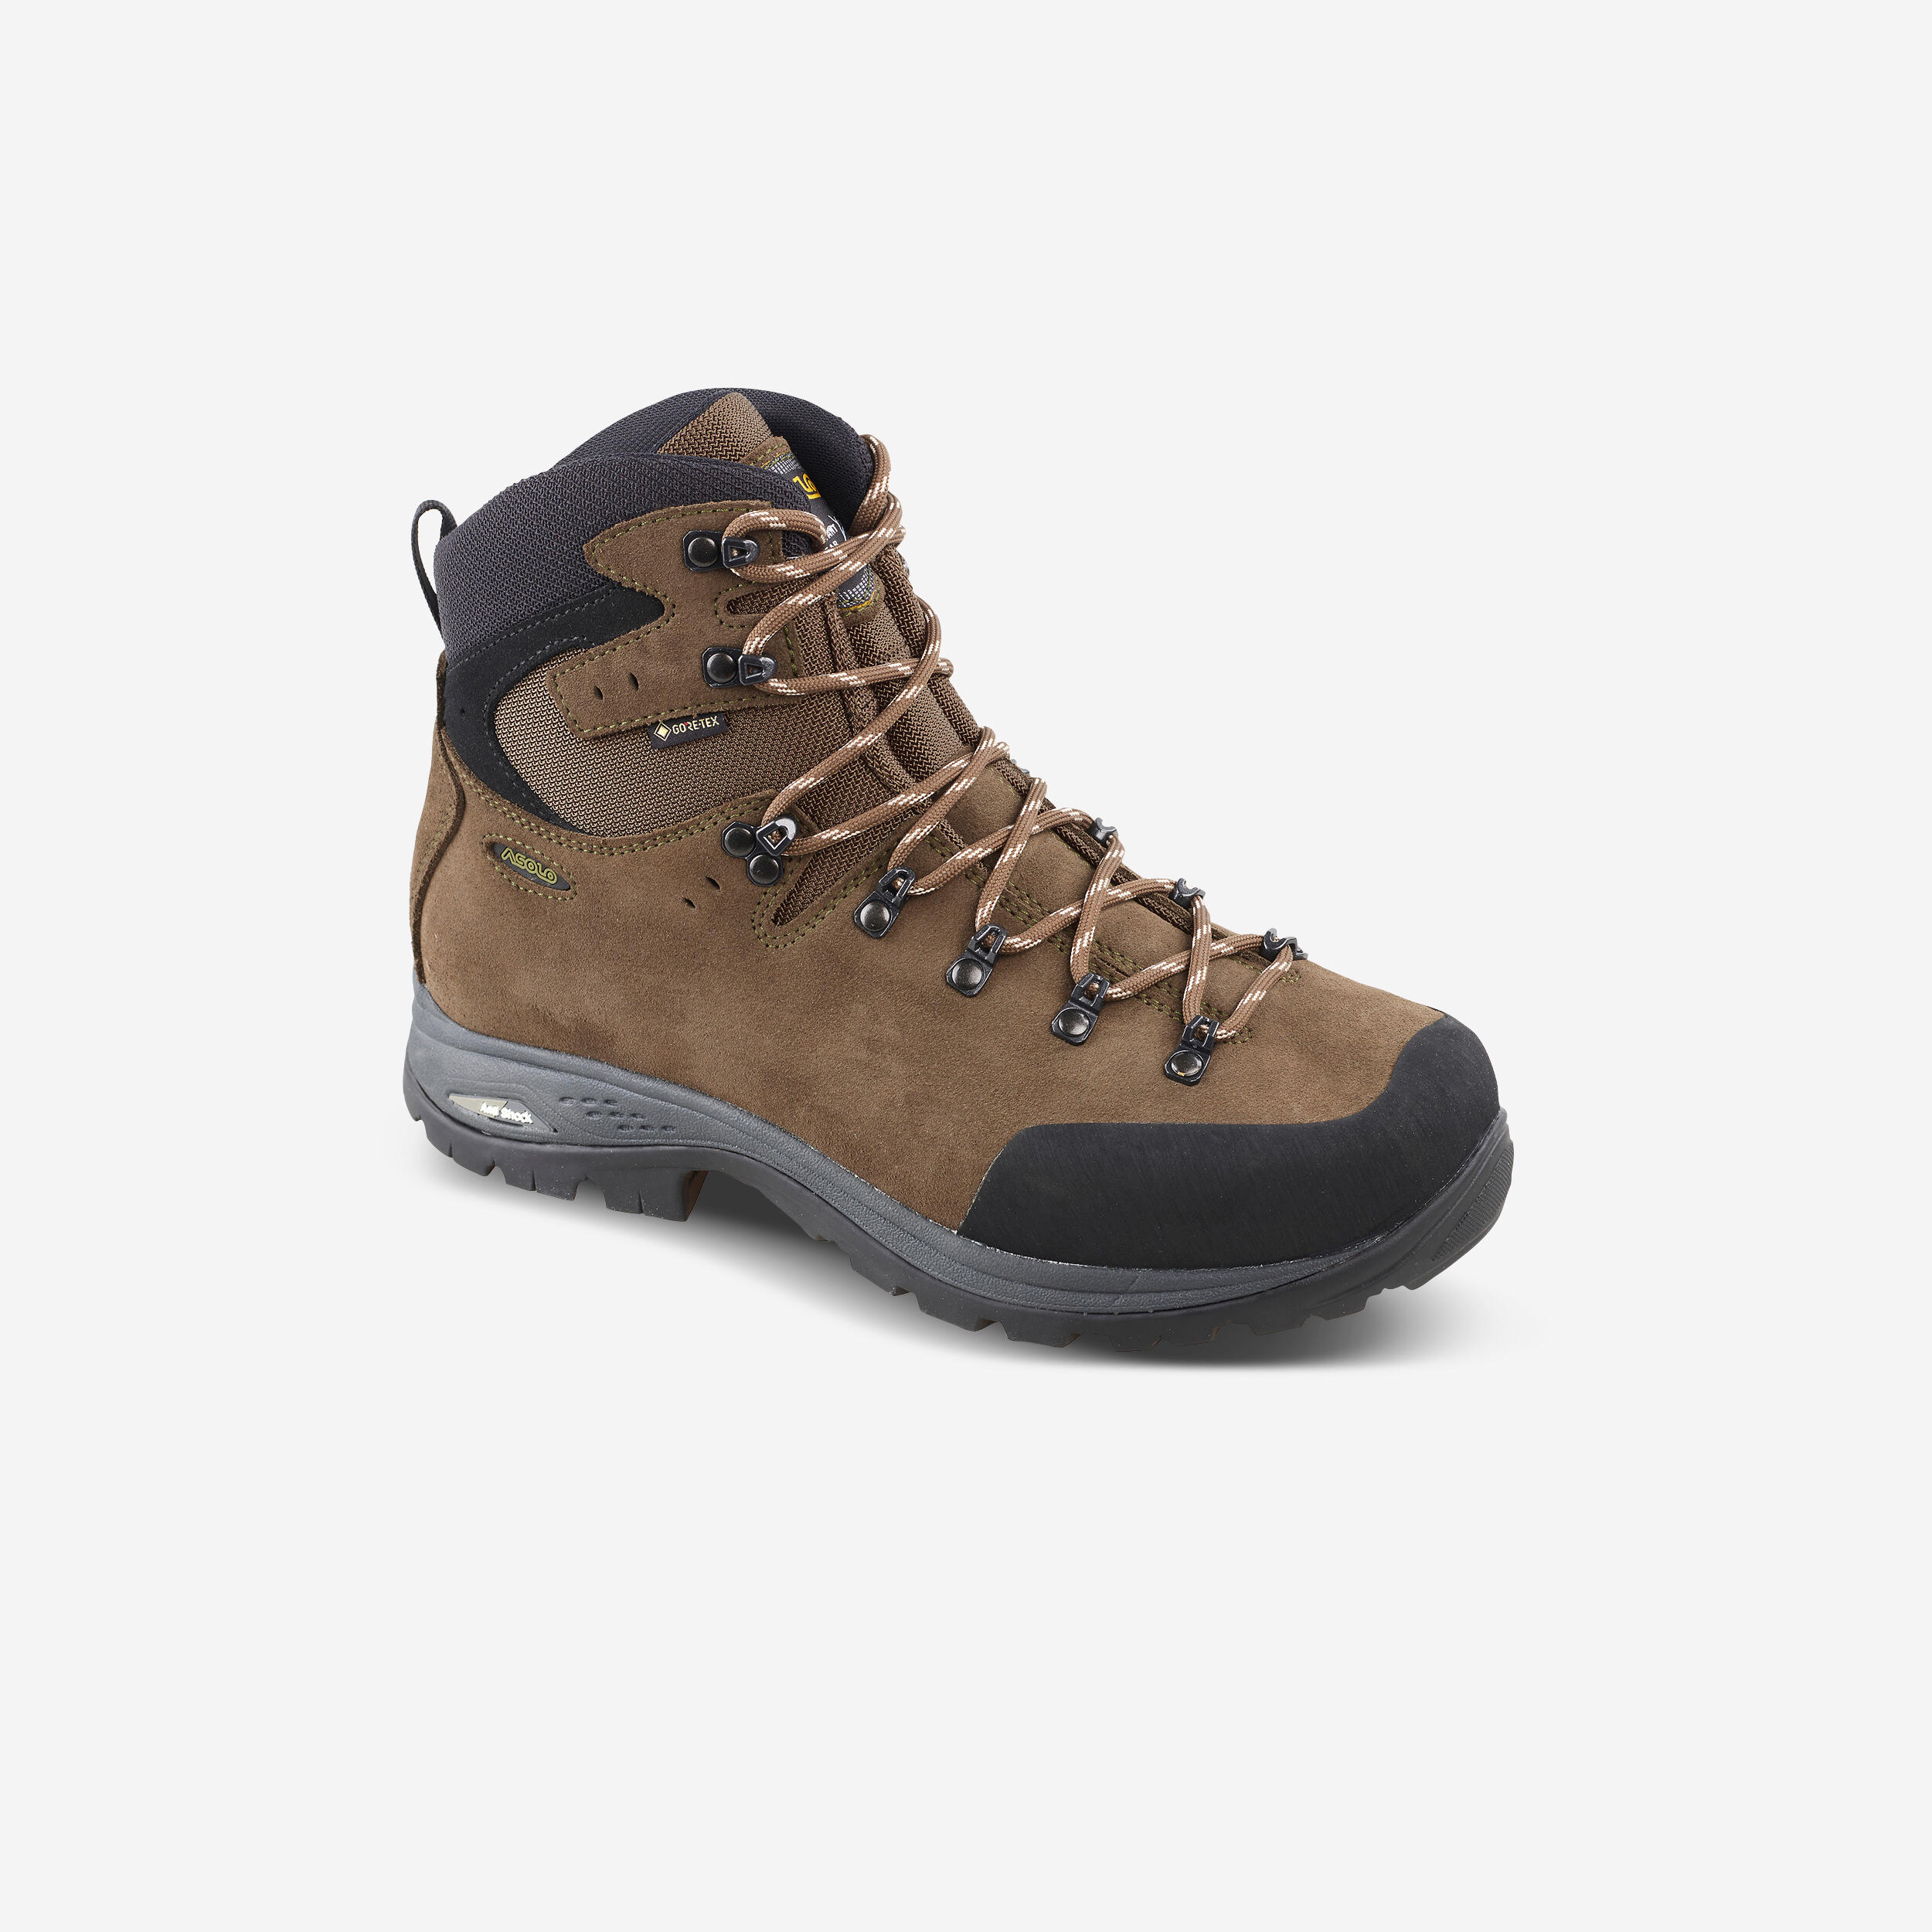 ASOLO Waterproof Country Sport Boots Asolo X-Hunt Forest Gore-Tex Vibram